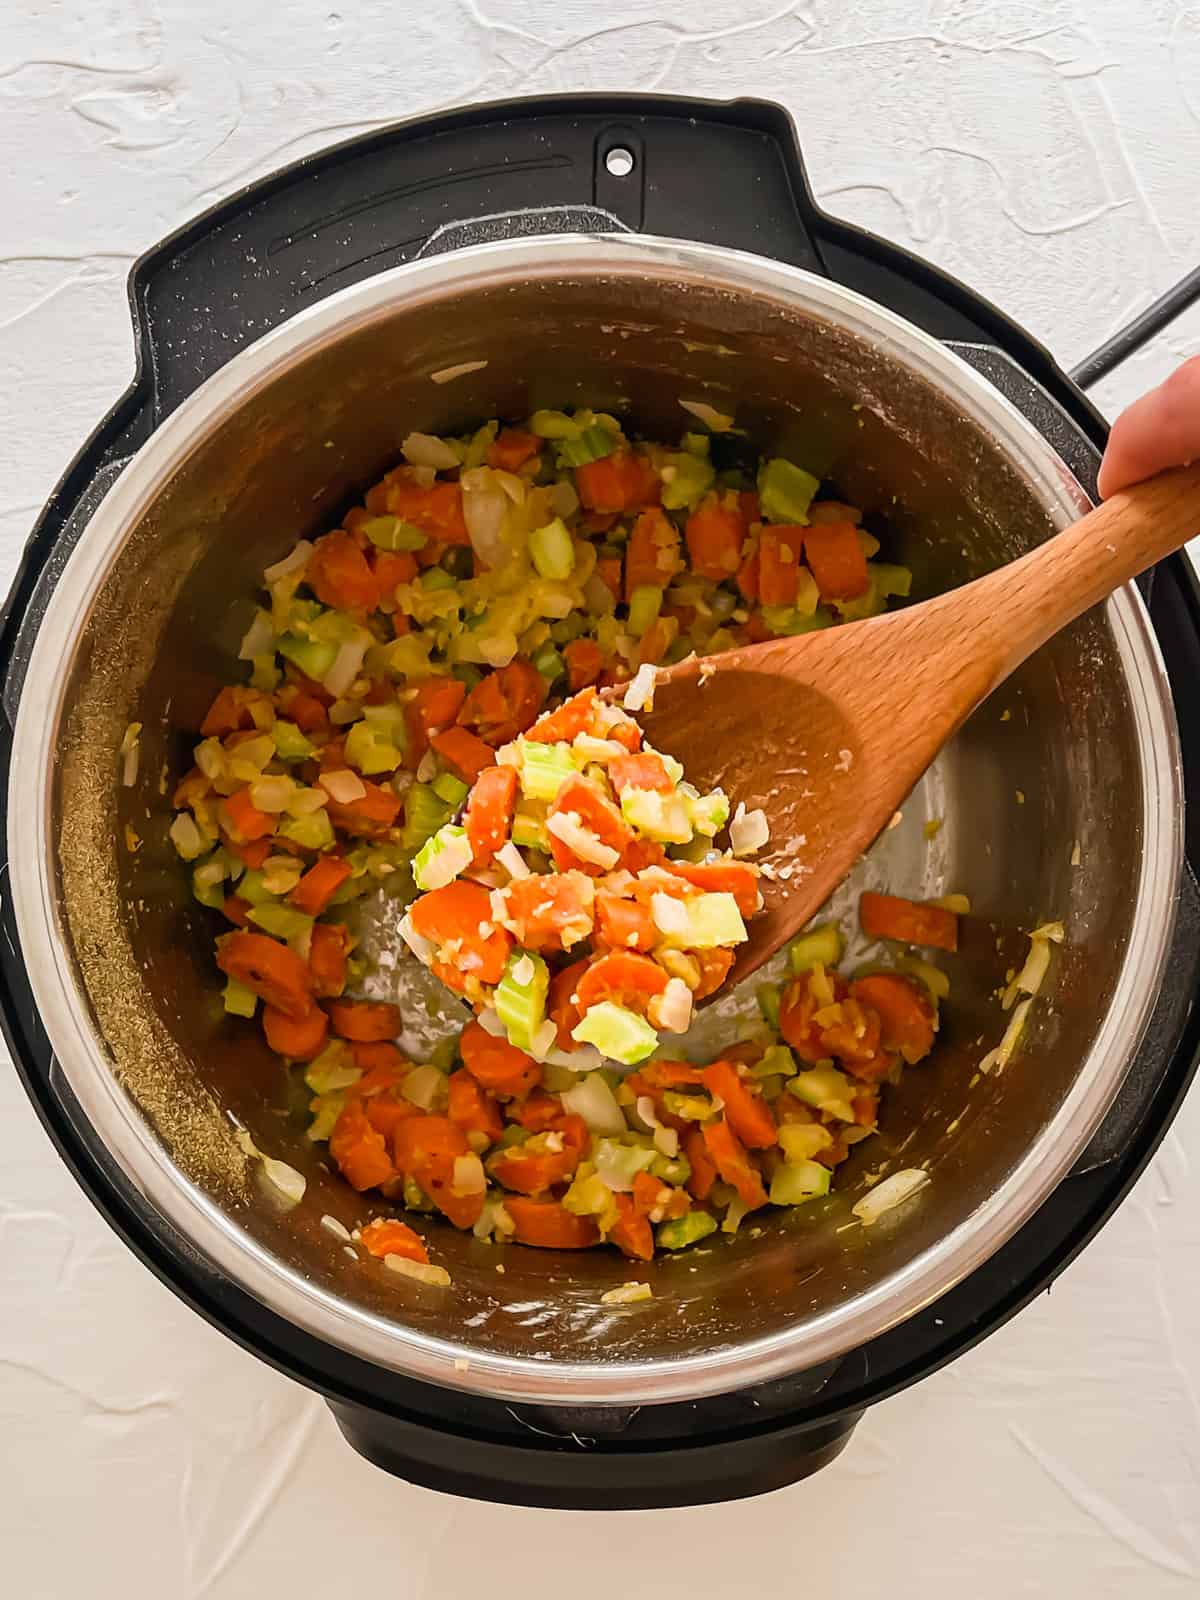 Whole wheat flour being stirred into sauteed carrots, onion, celery and garlic with a wooden spoon.